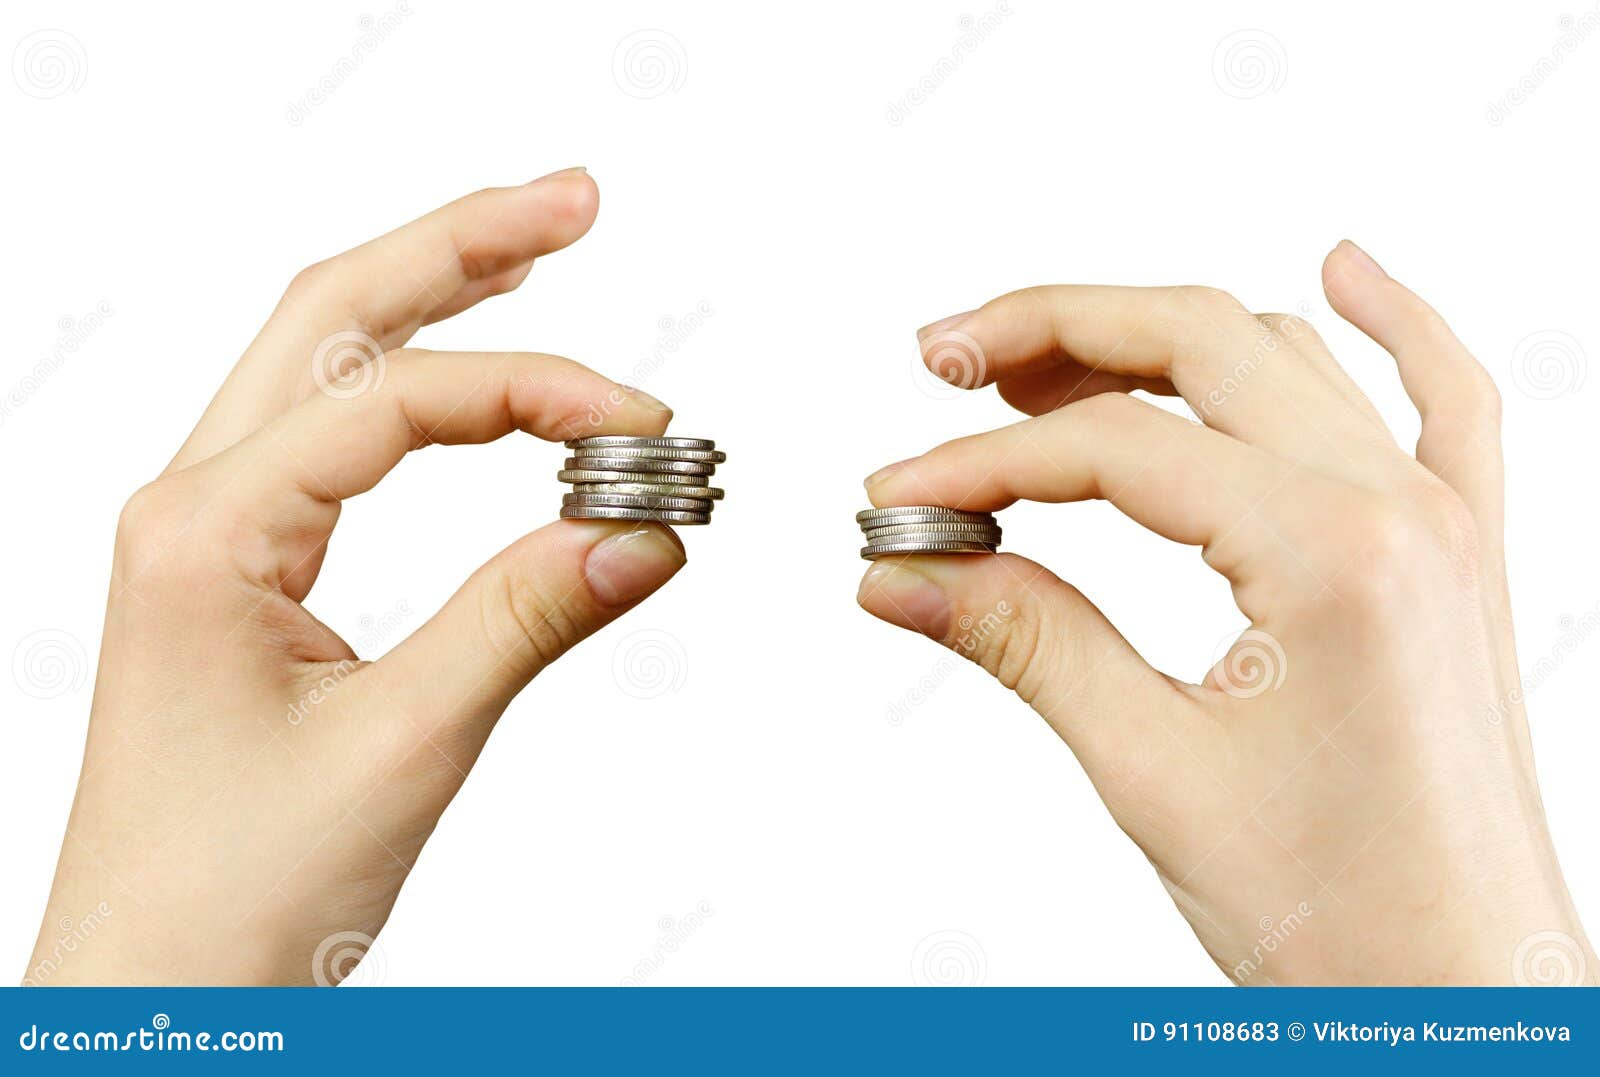 close up. hands compare two piles of coins of different sizes, i